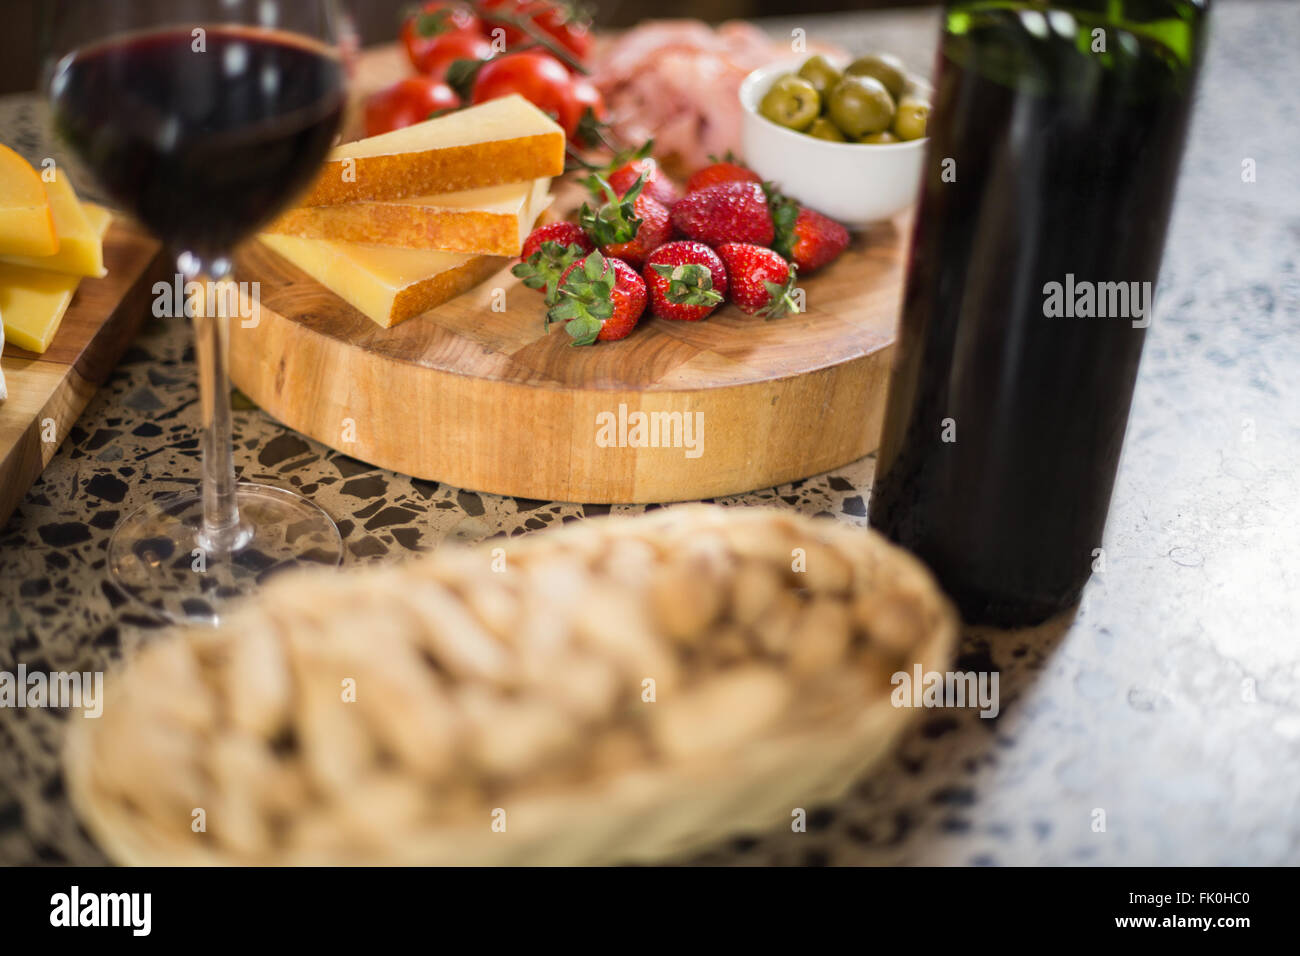 Wine bottle with a glass and a buch of food Stock Photo